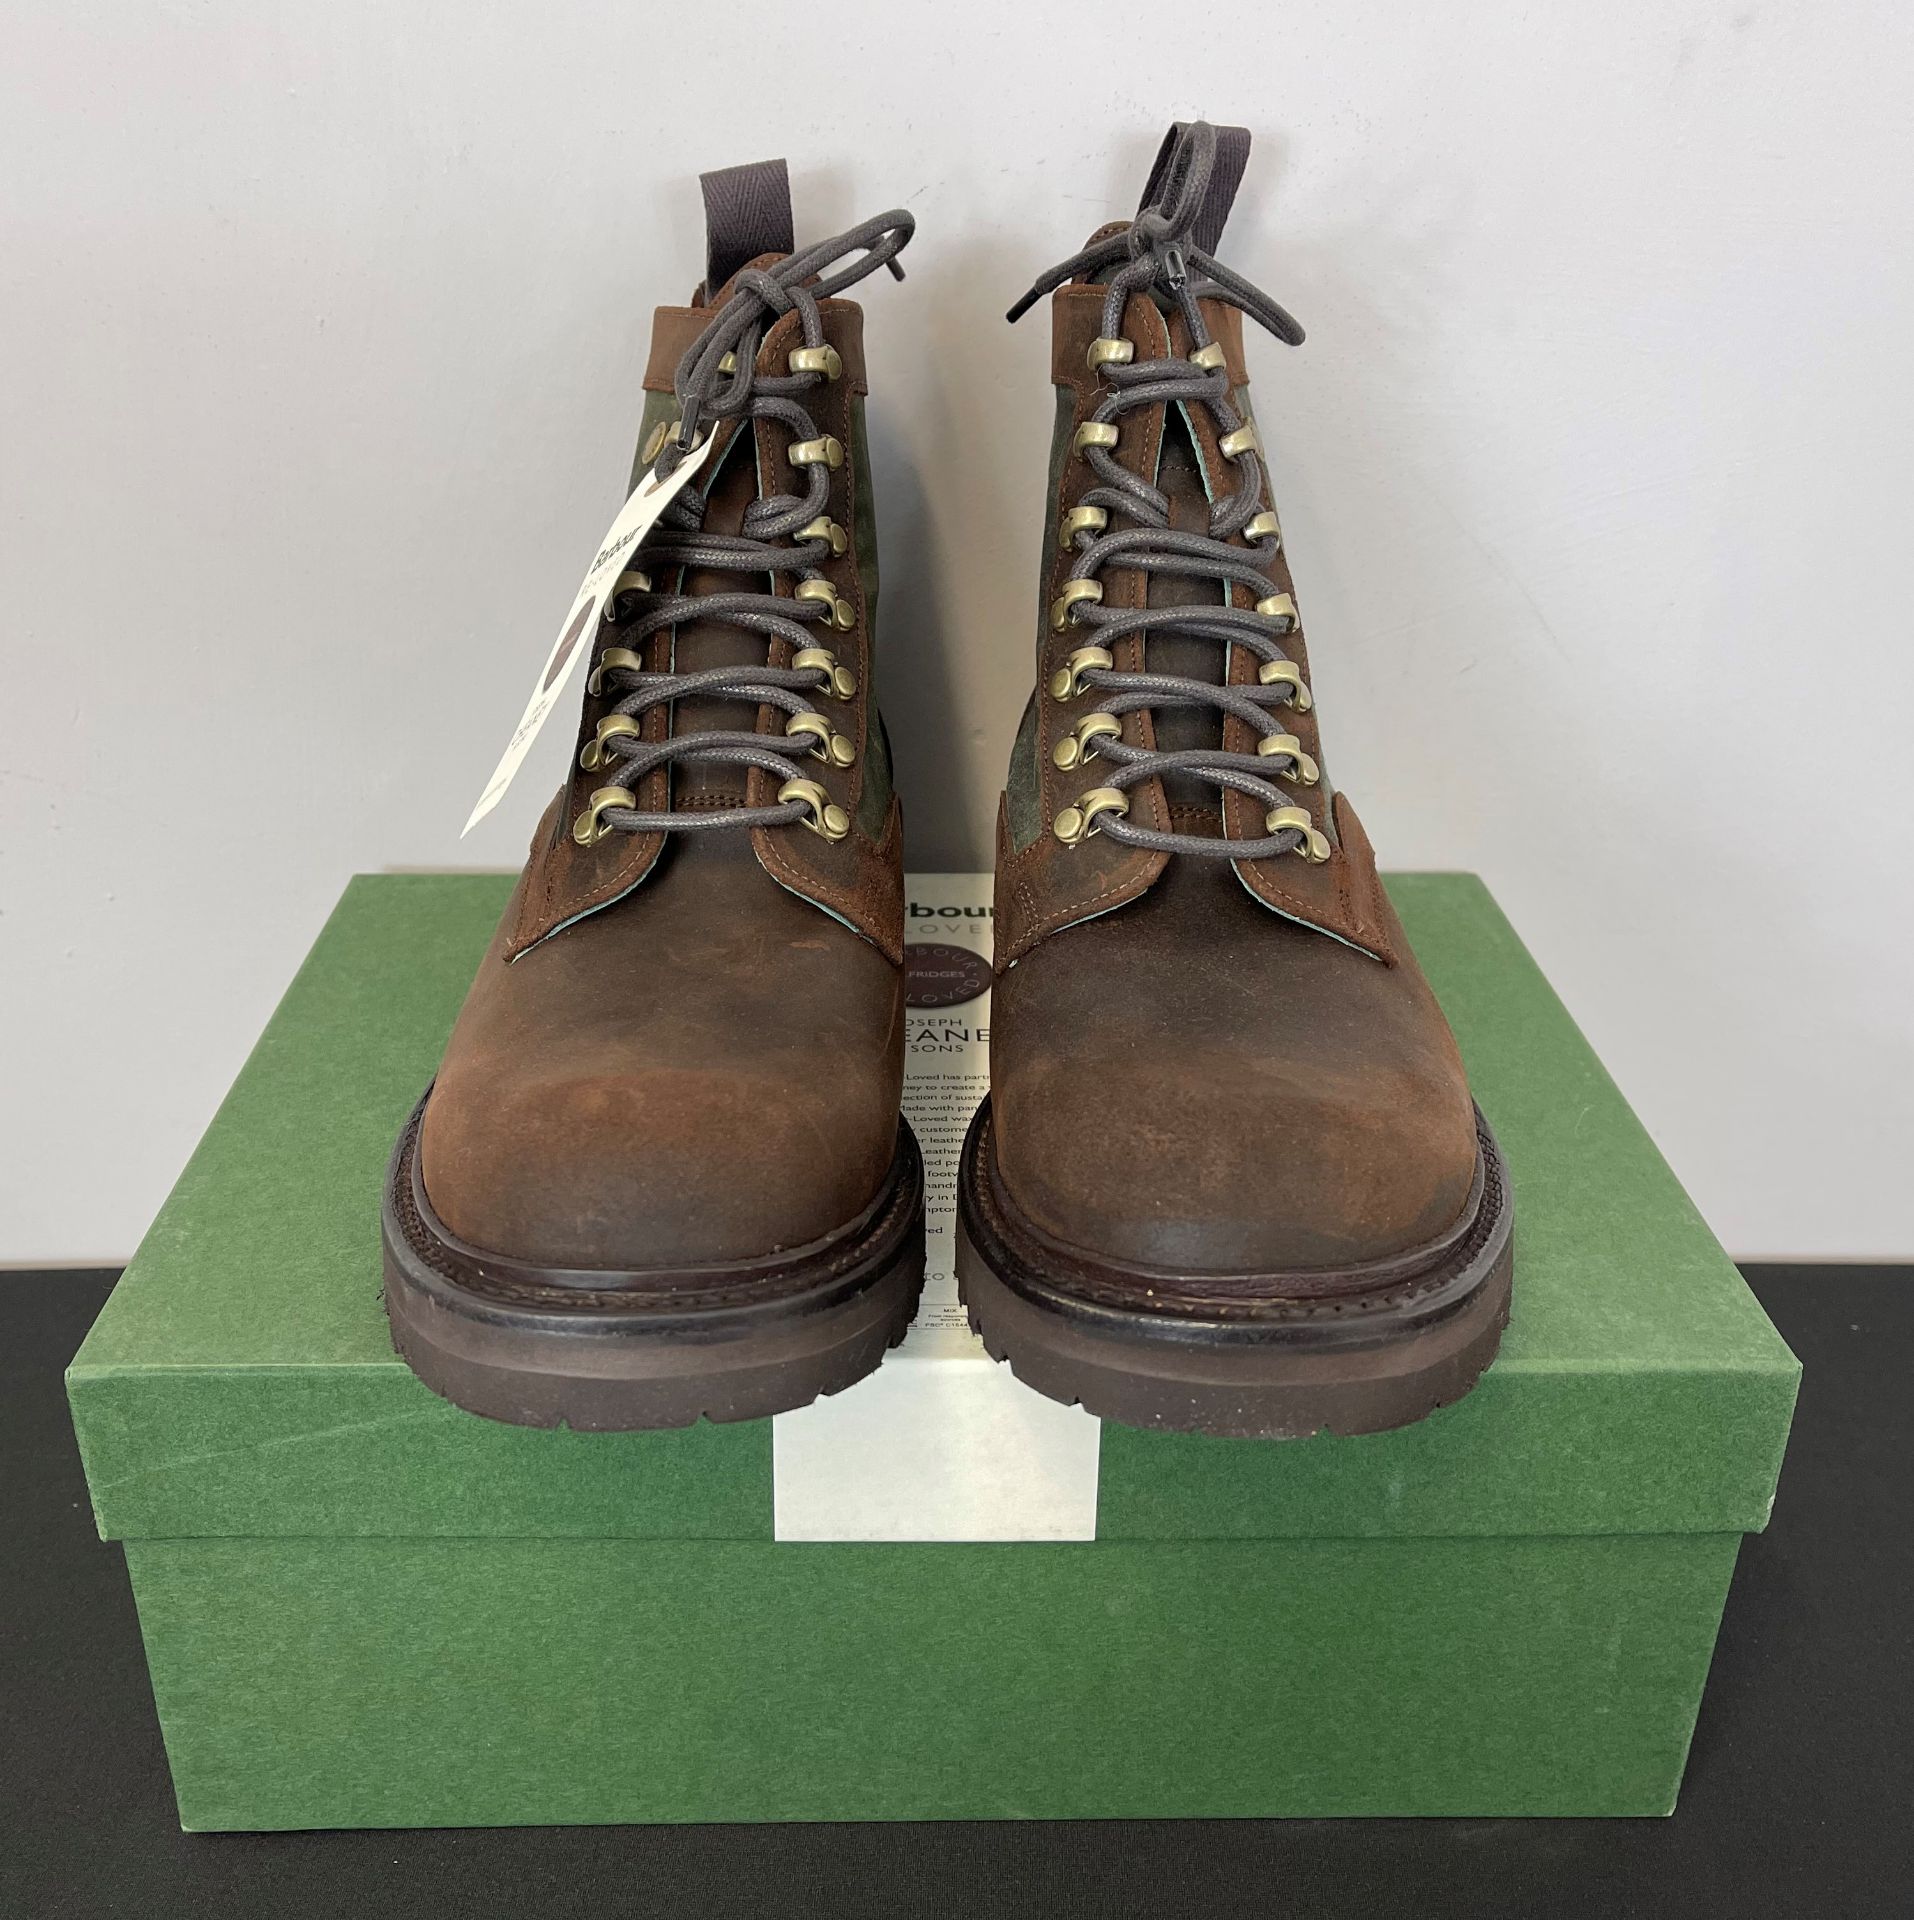 New Size 9 Barbour Joseph Cheaney Reloved Brown Polebrook Derby Boots - RRP - £189. - Image 2 of 3